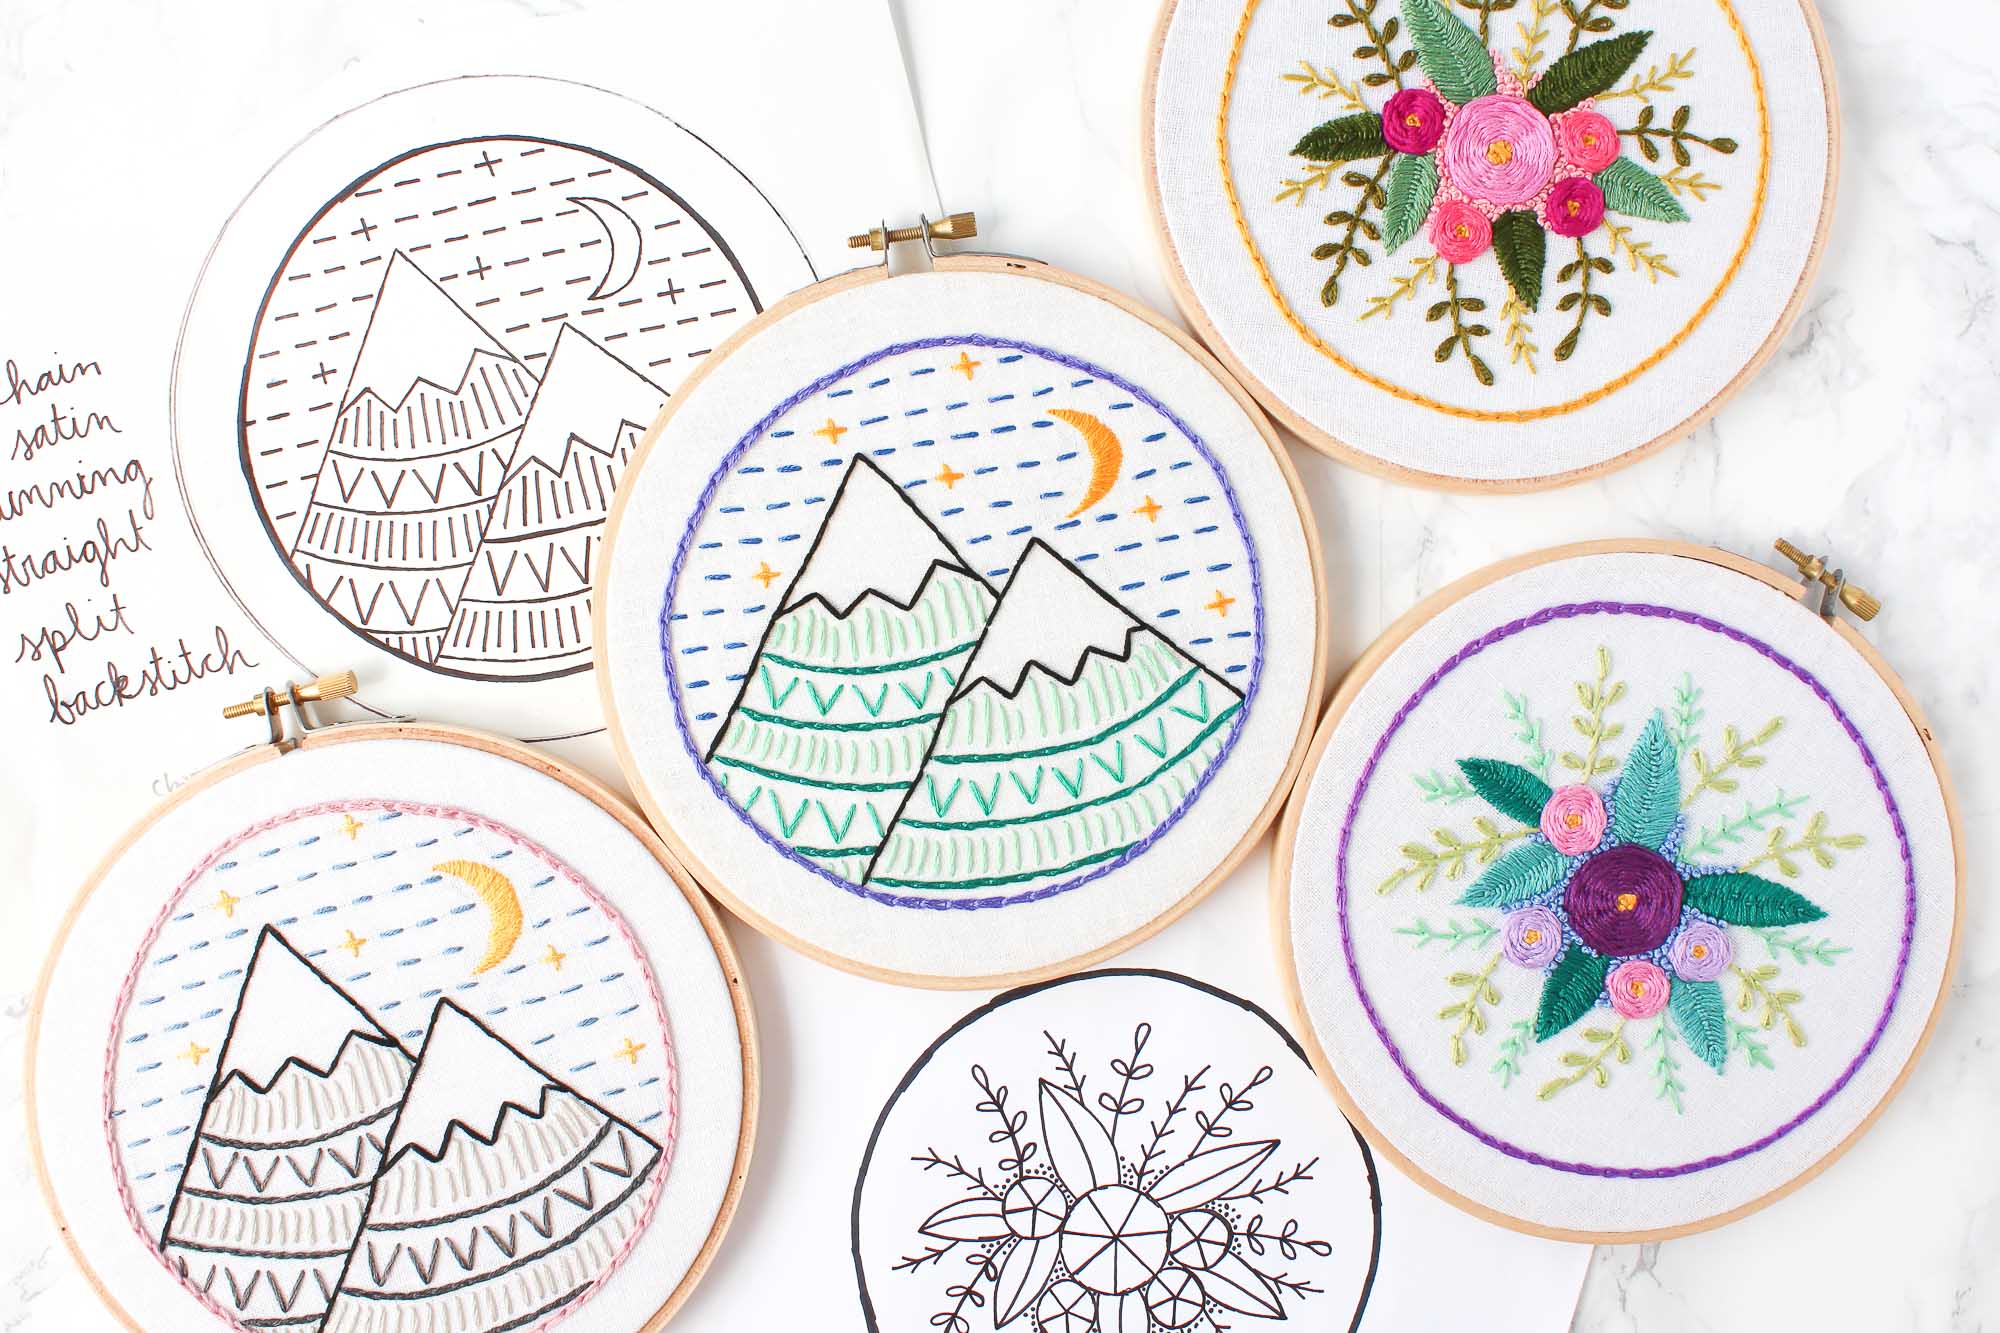 A collection of embroidery hoops, embroidered with mountains and flowers